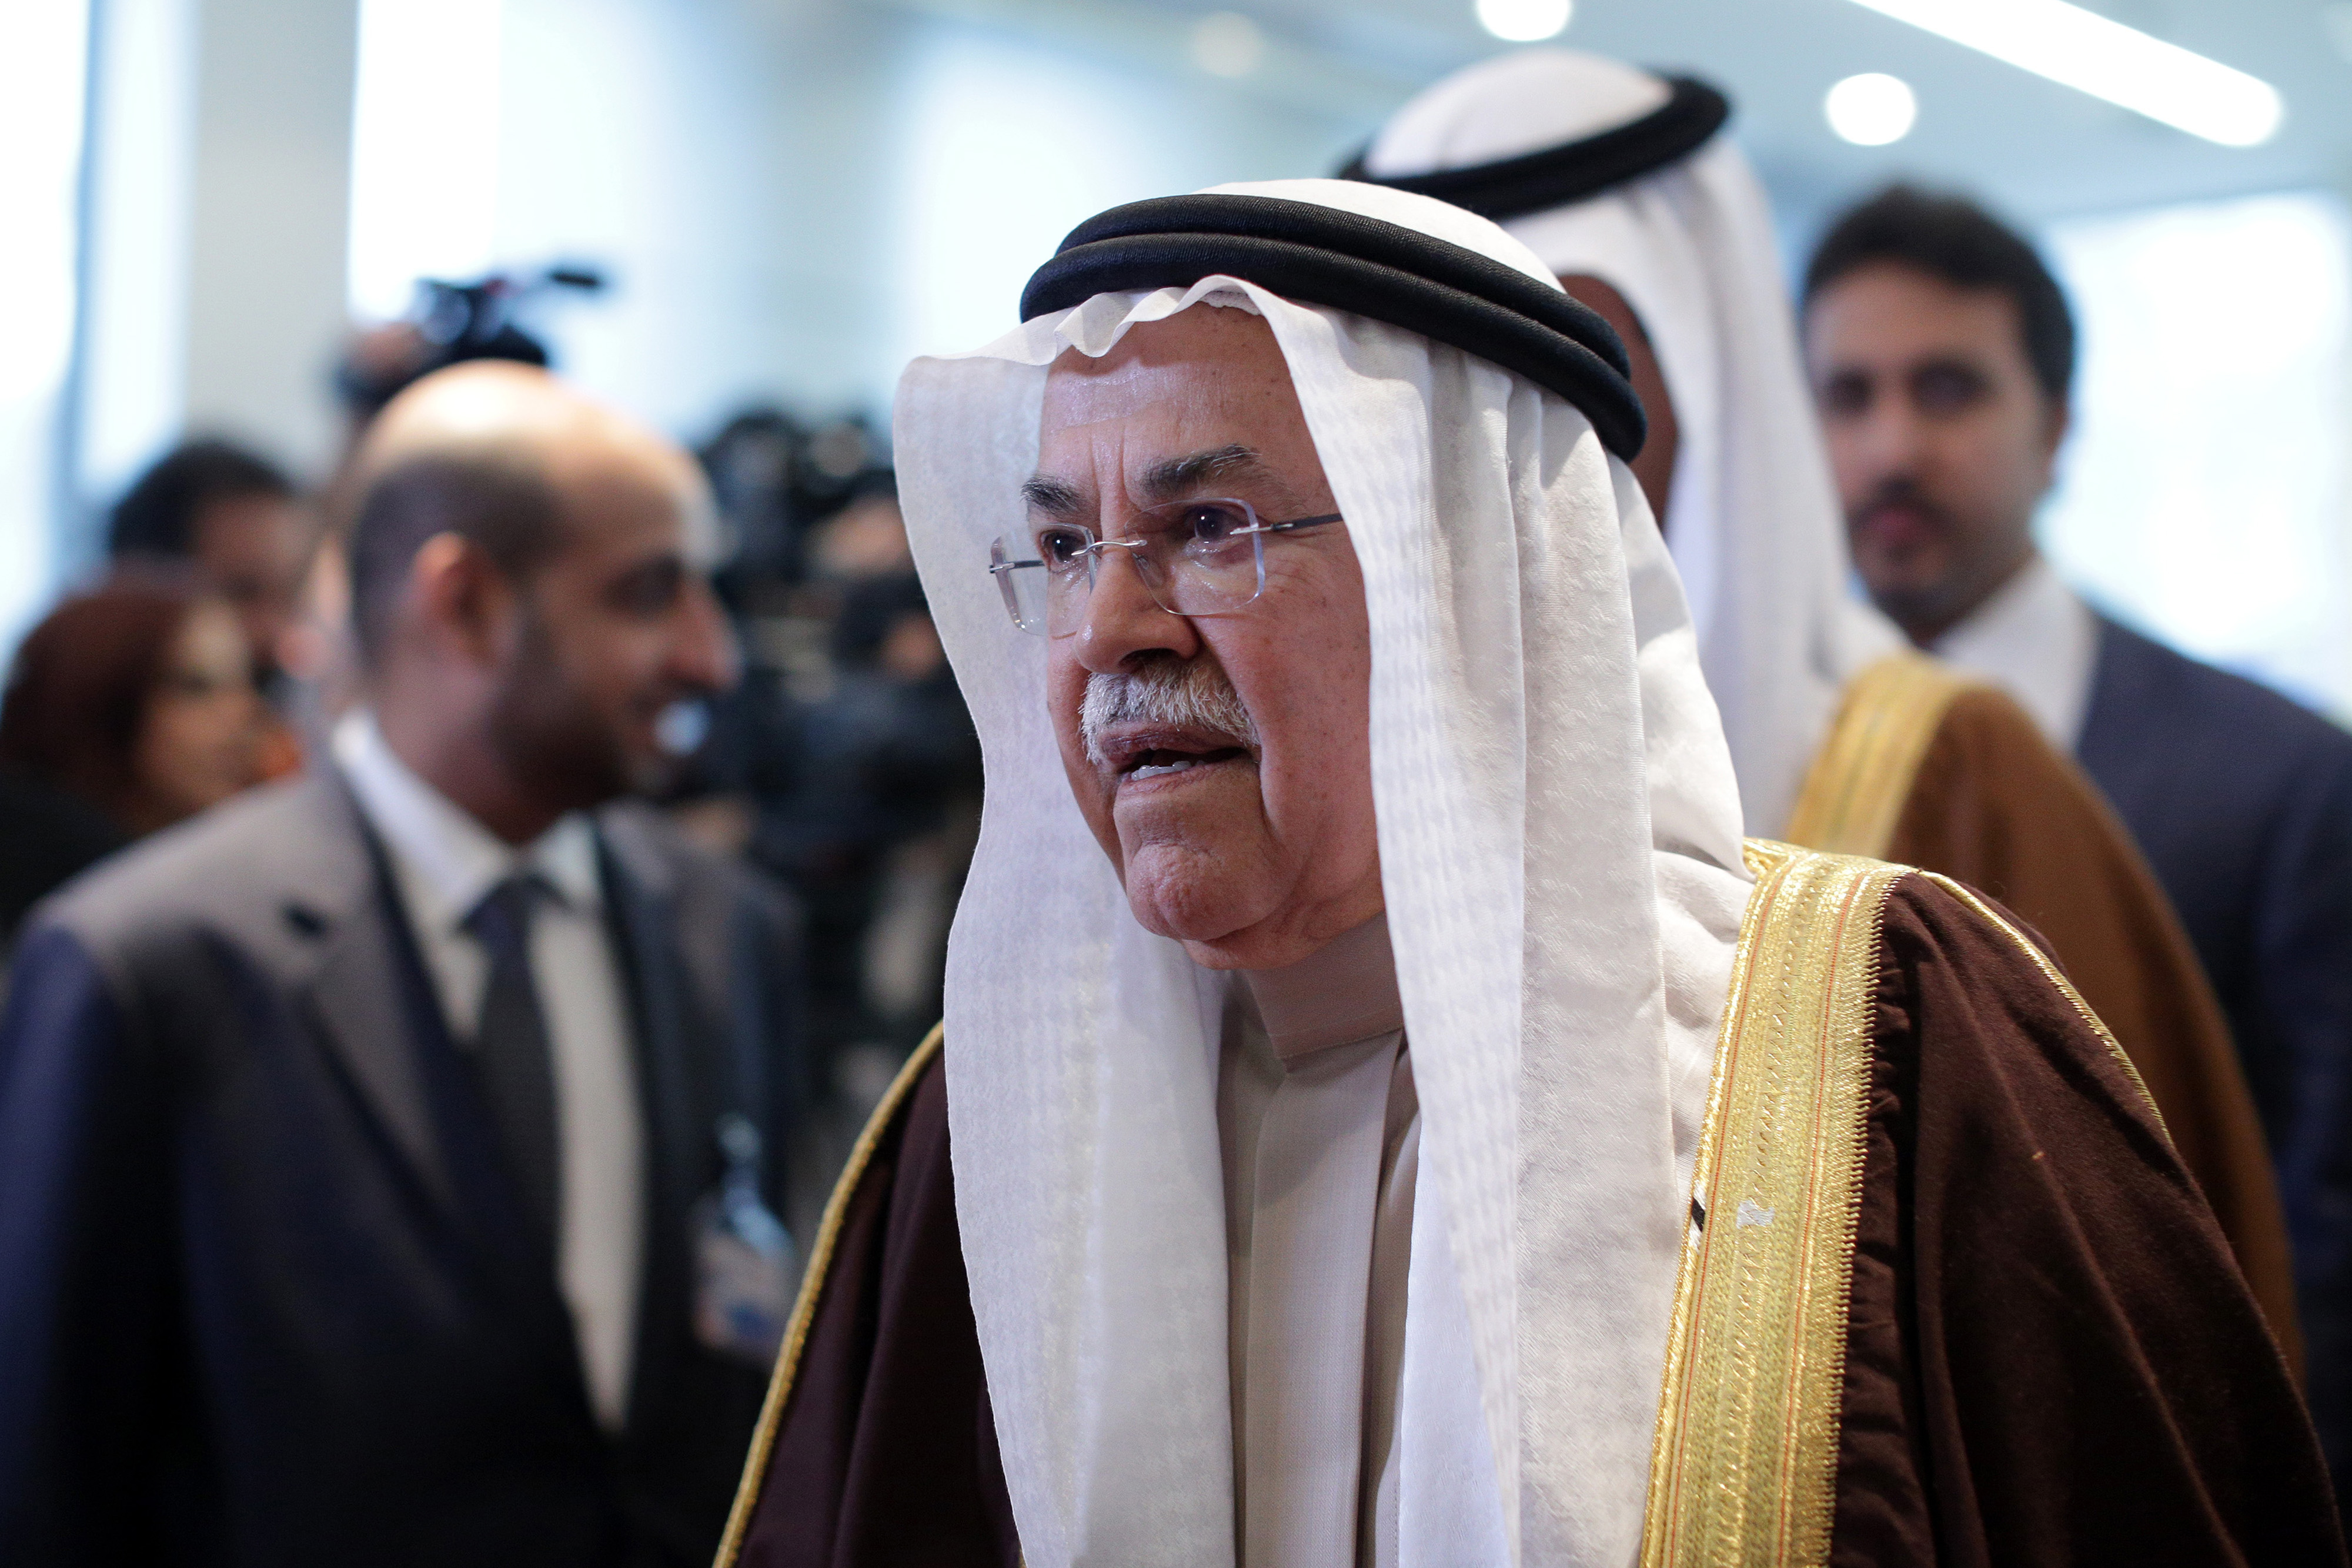 Ali Bin Ibrahim al-Naimi, Saudi Arabia's petroleum and mineral resources minister, at the 168th Organization of Petroleum Exporting Countries (OPEC) meeting in Vienna on Dec. 4, 2015.